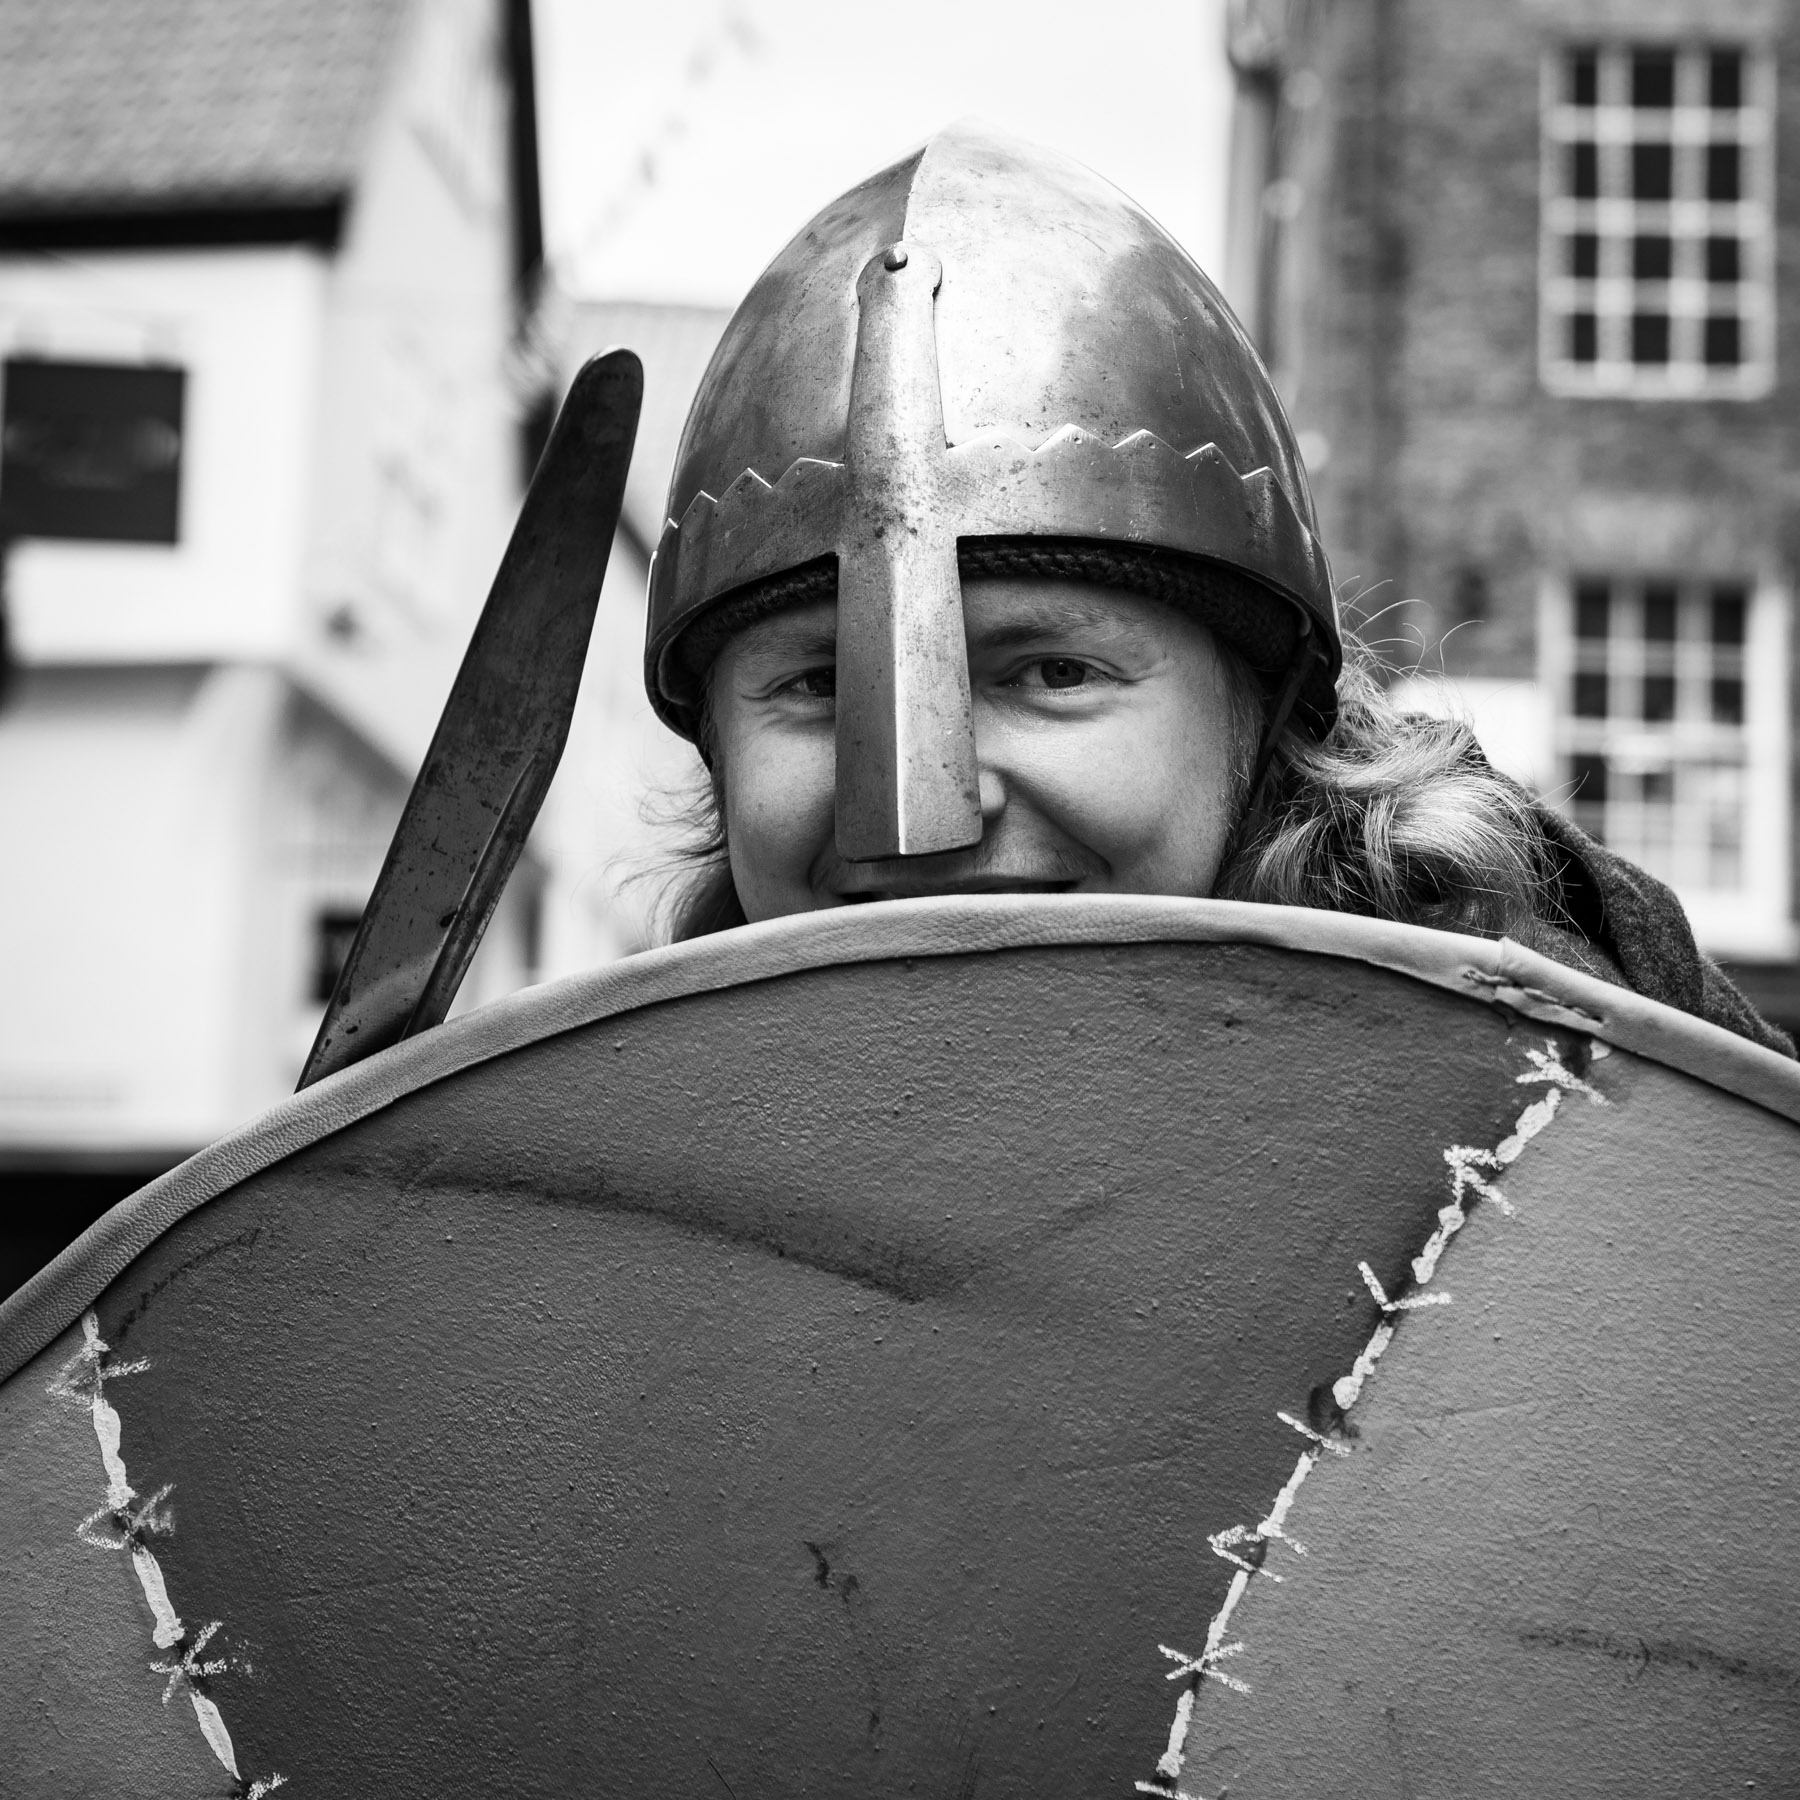 Petergate Protector, Viking York, Andy Towse